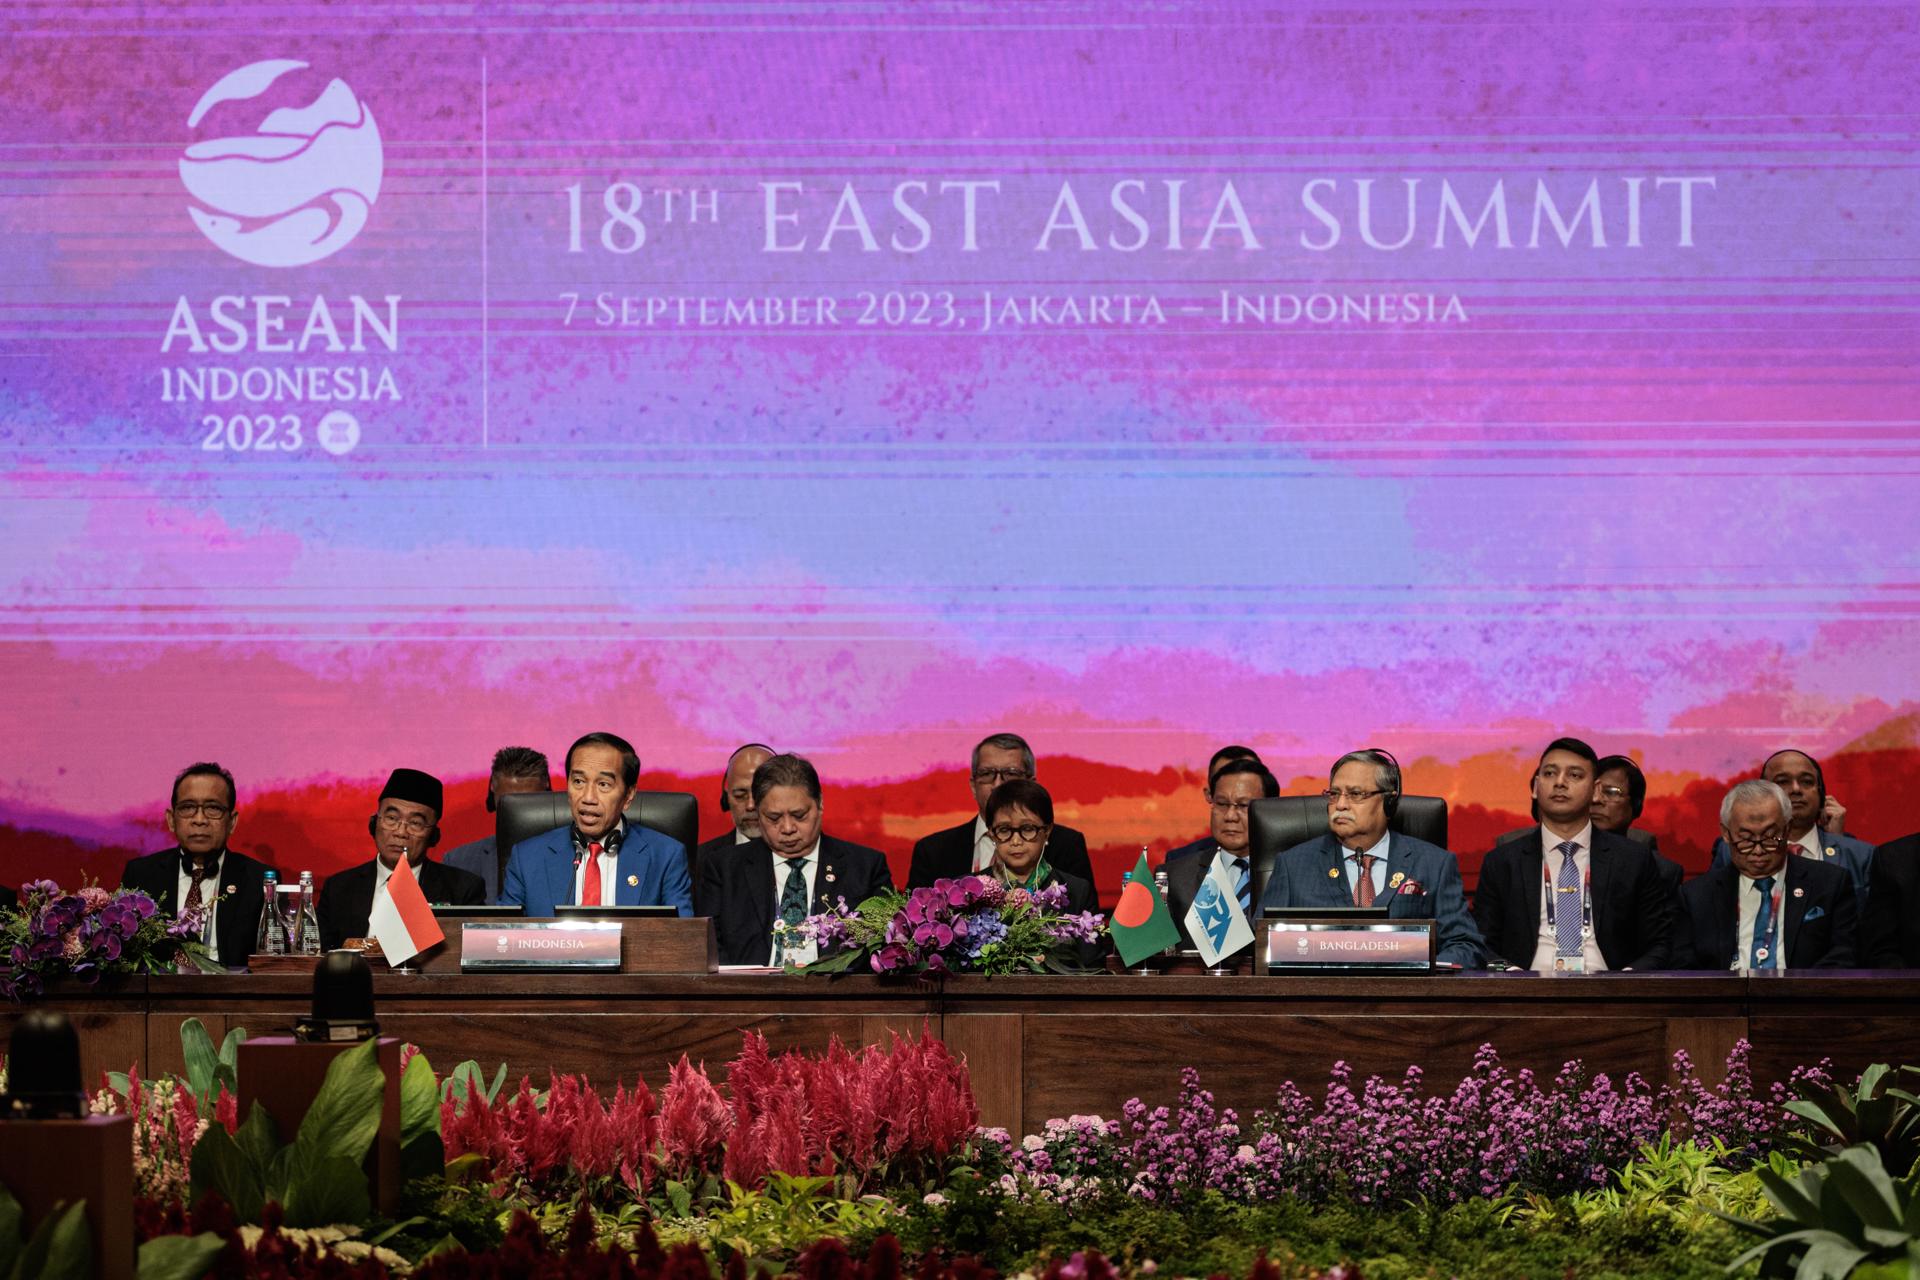 Indonesia's President Joko Widodo (L) and Bangladesh's President Mohammed Shahabuddin (R) attend the 18th East Asia Summit as part of the 43rd Association of Southeast Asian Nations (ASEAN) Summit in Jakarta, Indonesia, 07 September 2023. EFE/EPA/YASUYOSHI CHIBA/POOL